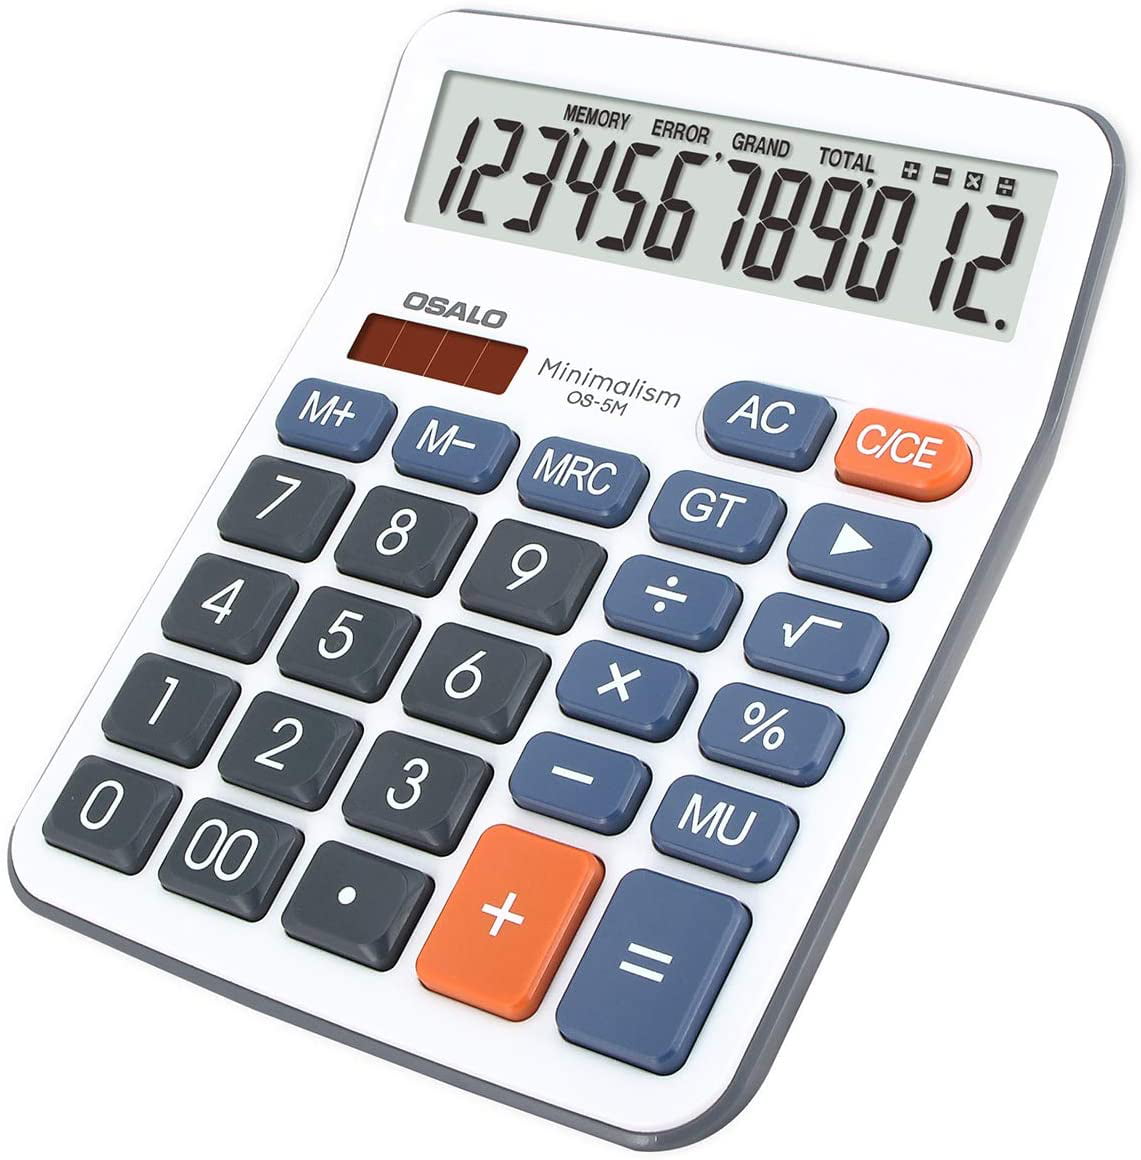 Details about   Brand New 8 Digit Desk Calculator Jumbo Large Buttons Free delivery Uk 